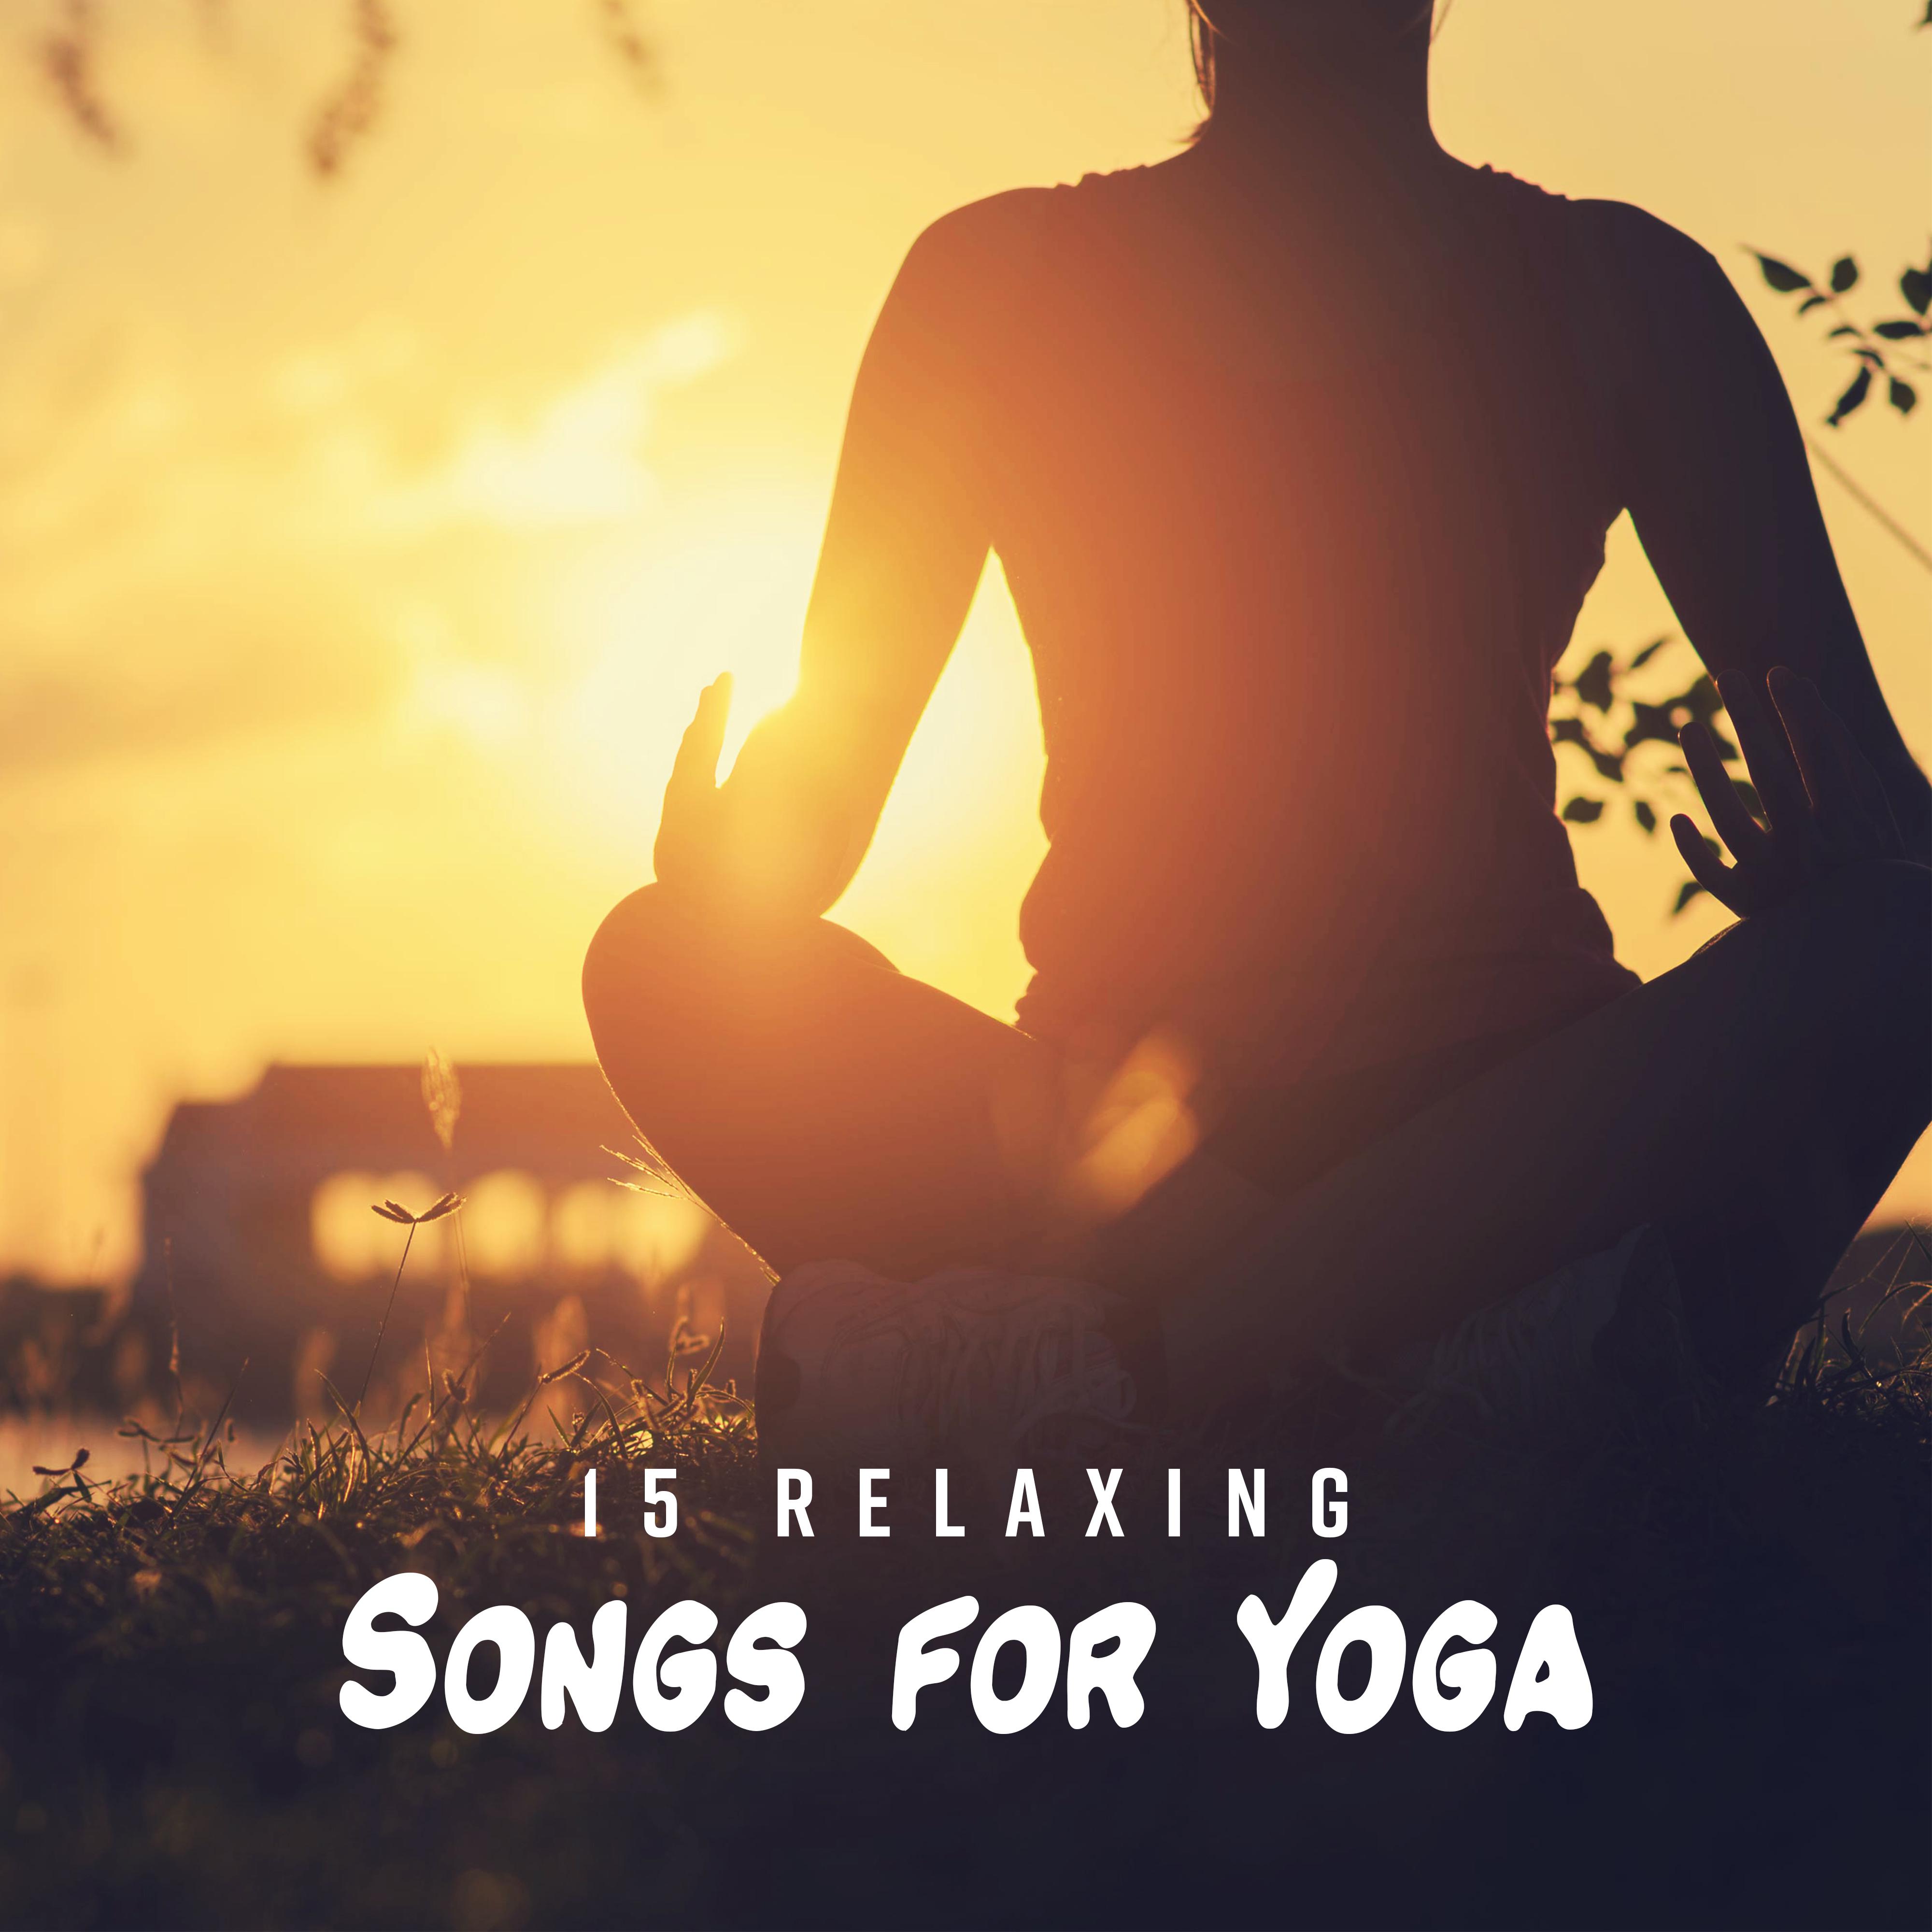 15 Relaxing Songs for Yoga